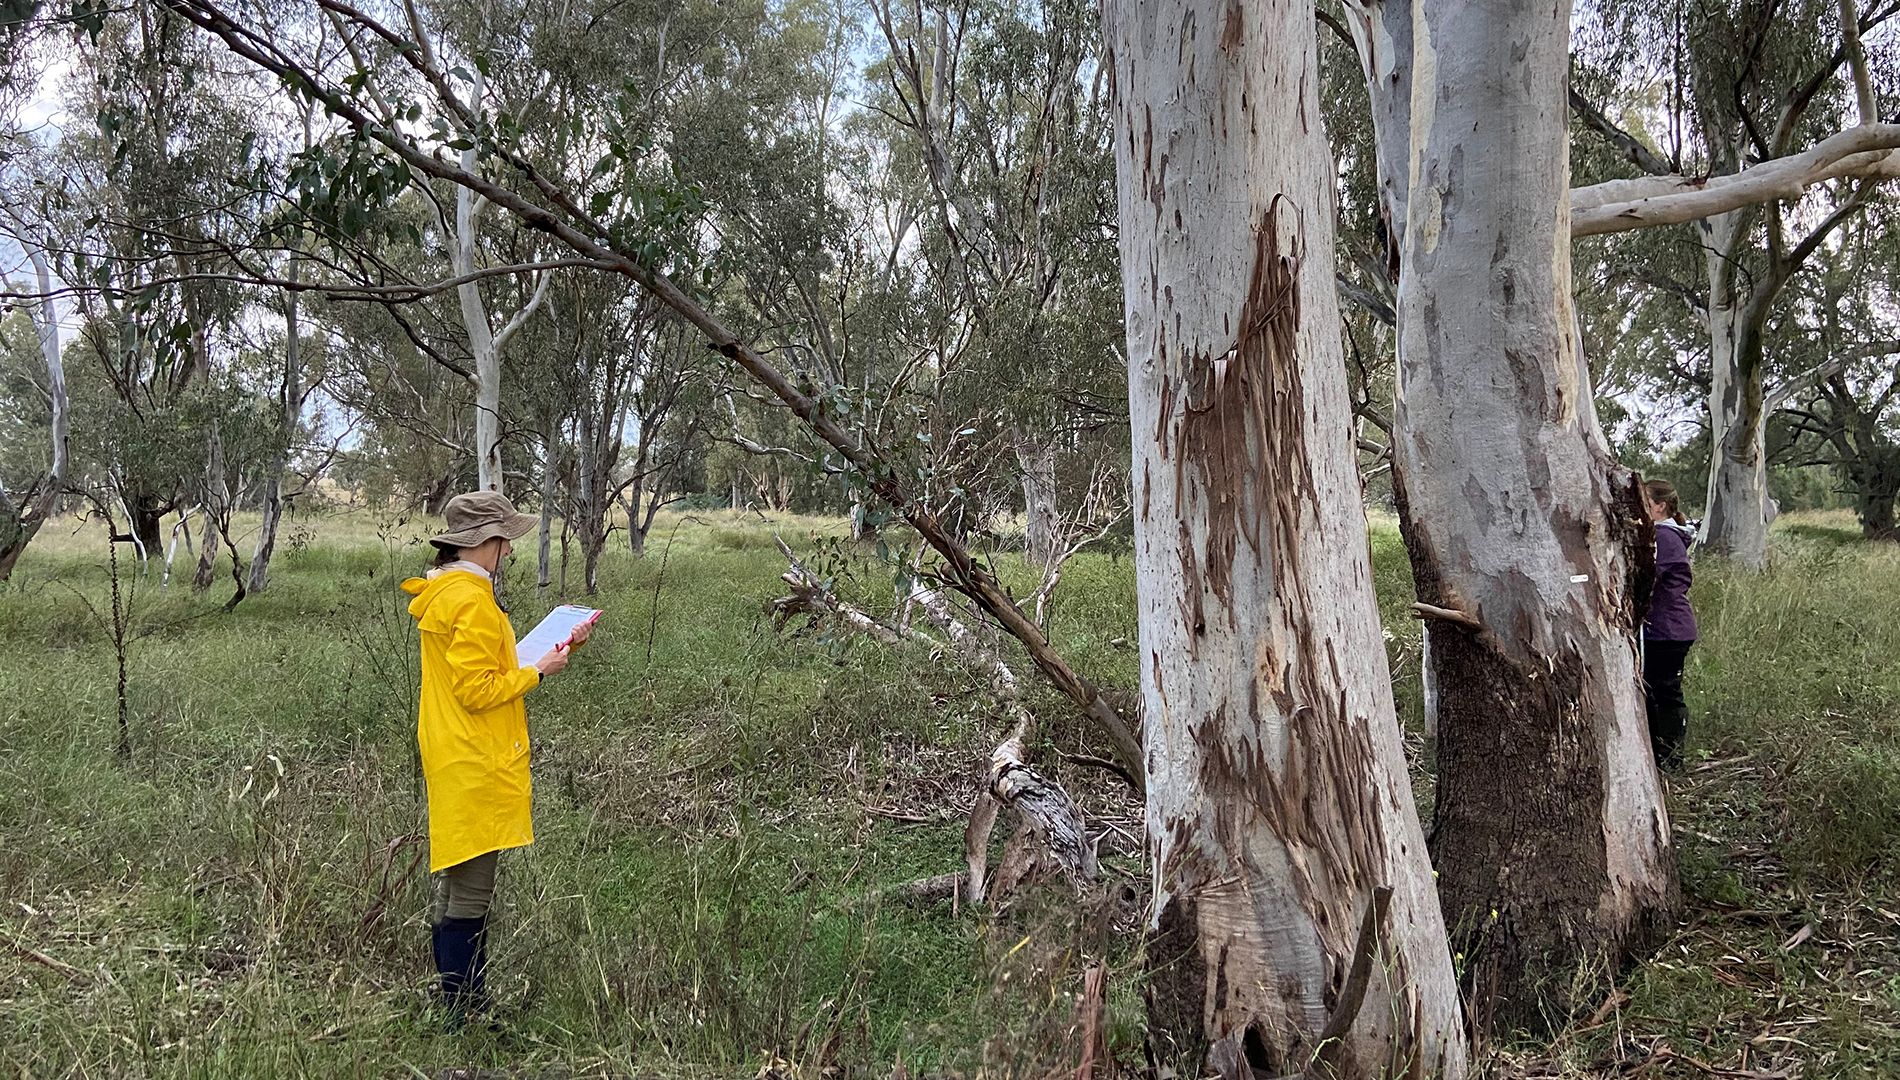 DPE field team measuring tree growth and health in the Northern Murray Darling Basin.